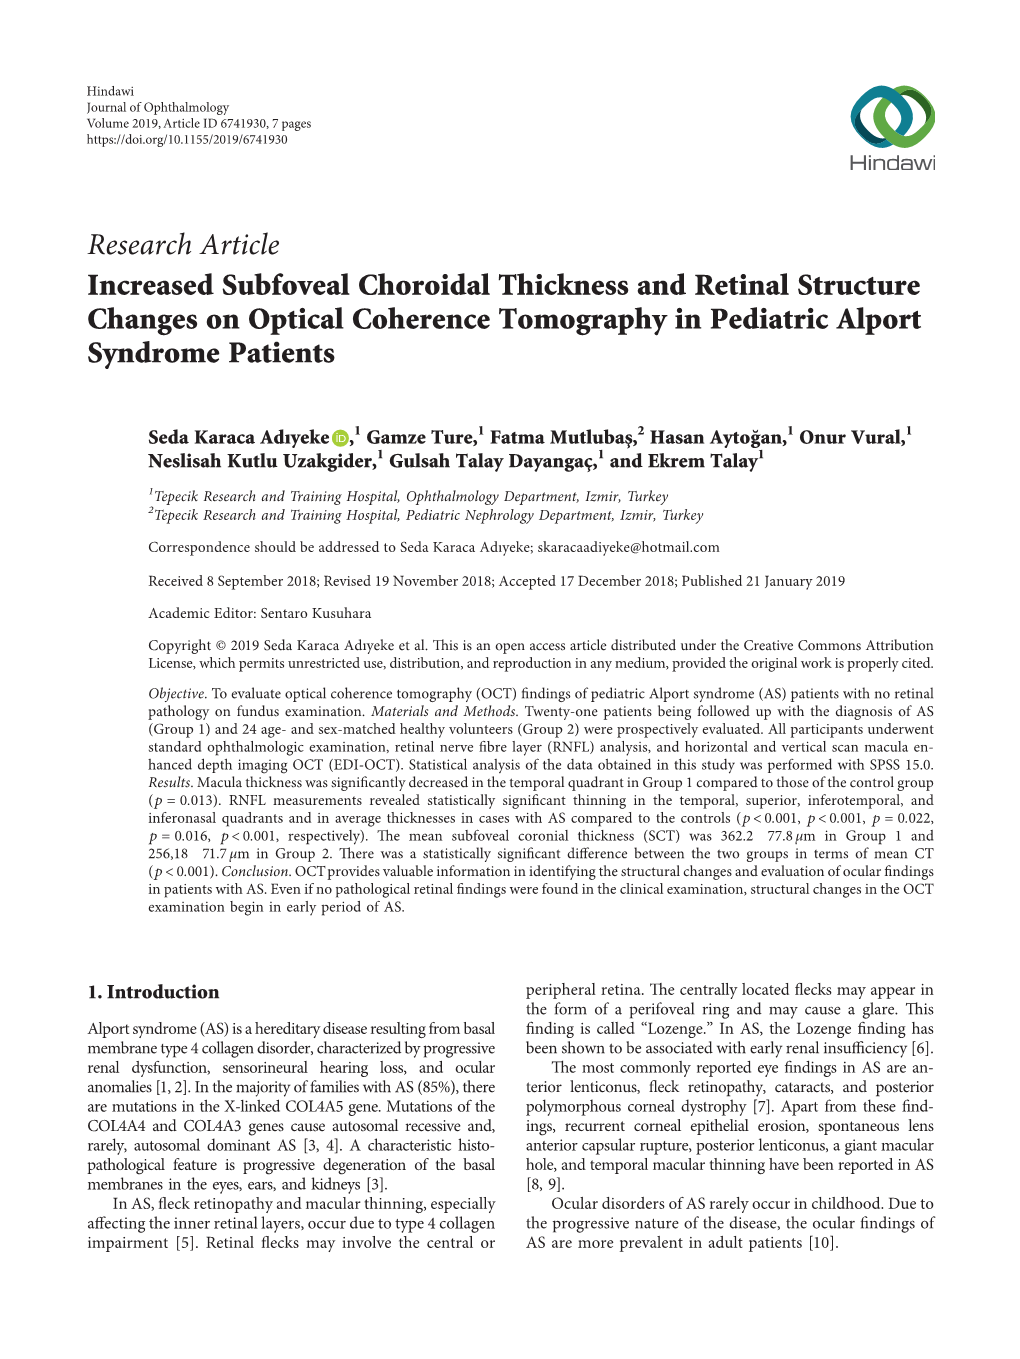 Research Article Increased Subfoveal Choroidal Thickness and Retinal Structure Changes on Optical Coherence Tomography in Pediatric Alport Syndrome Patients